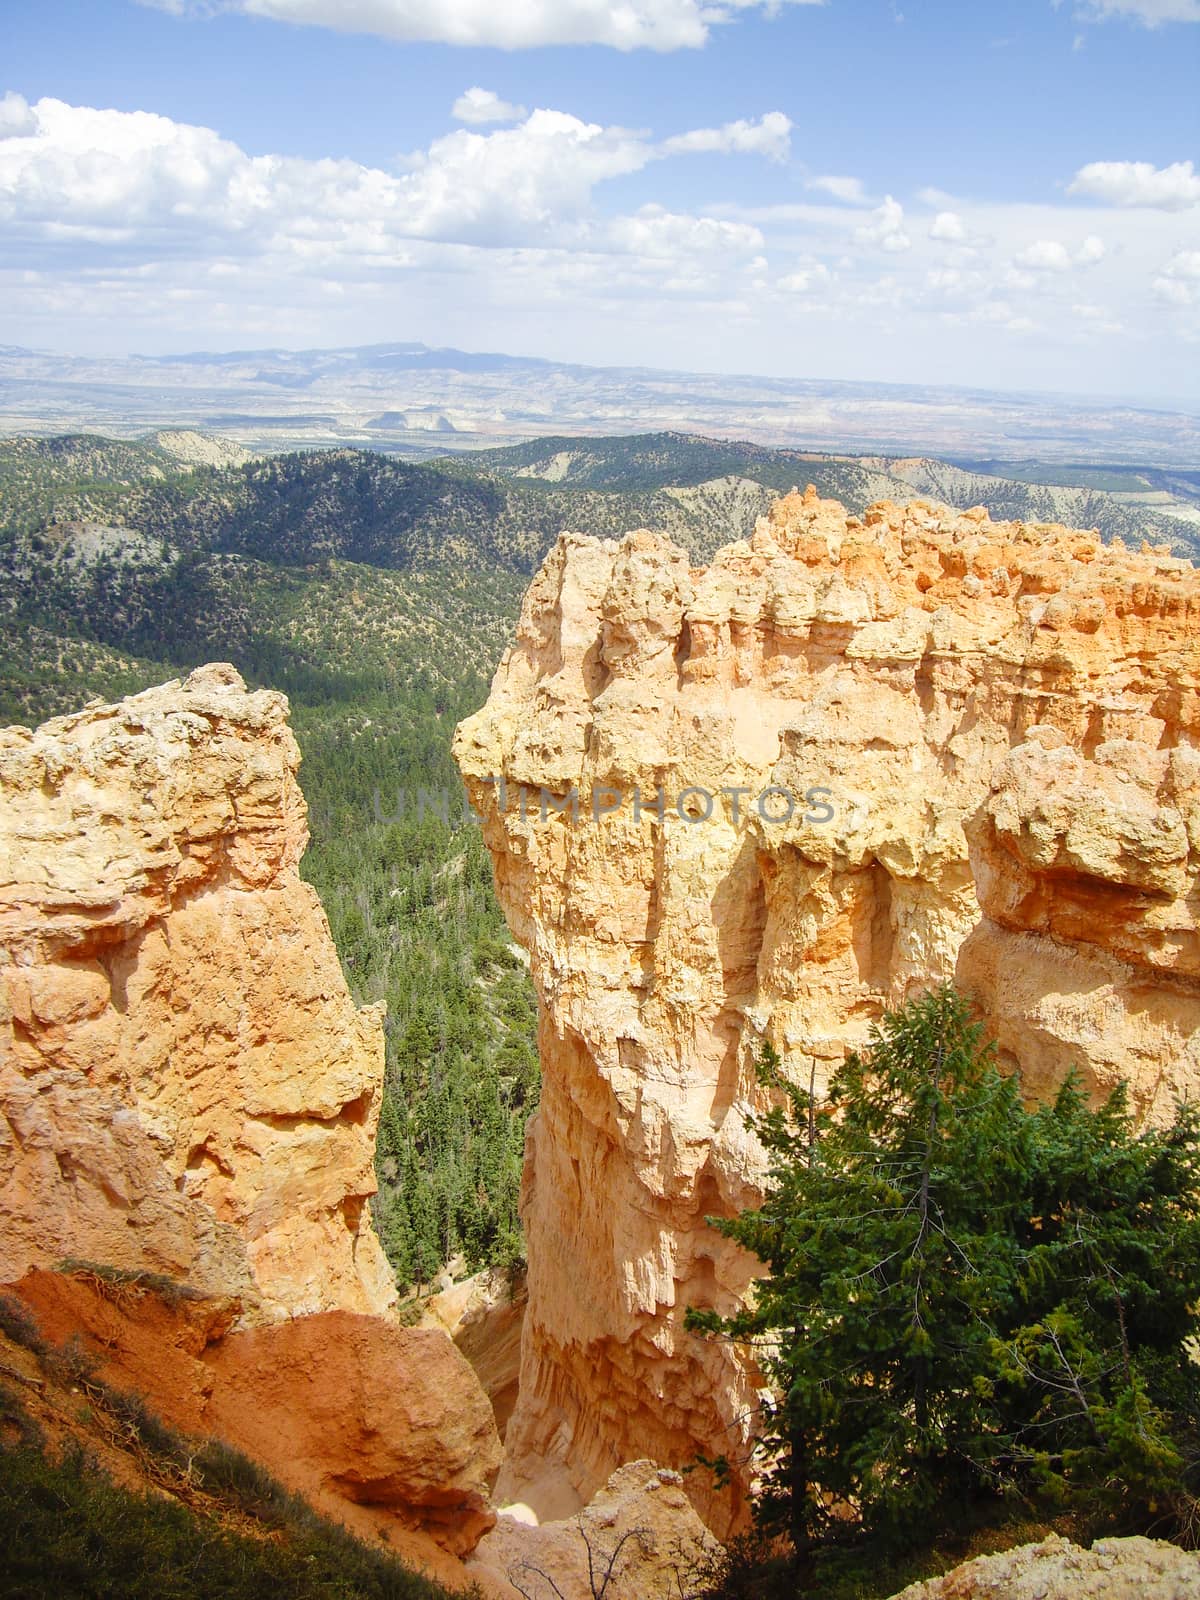 Pillars of rock at Bryce Canyon by emattil